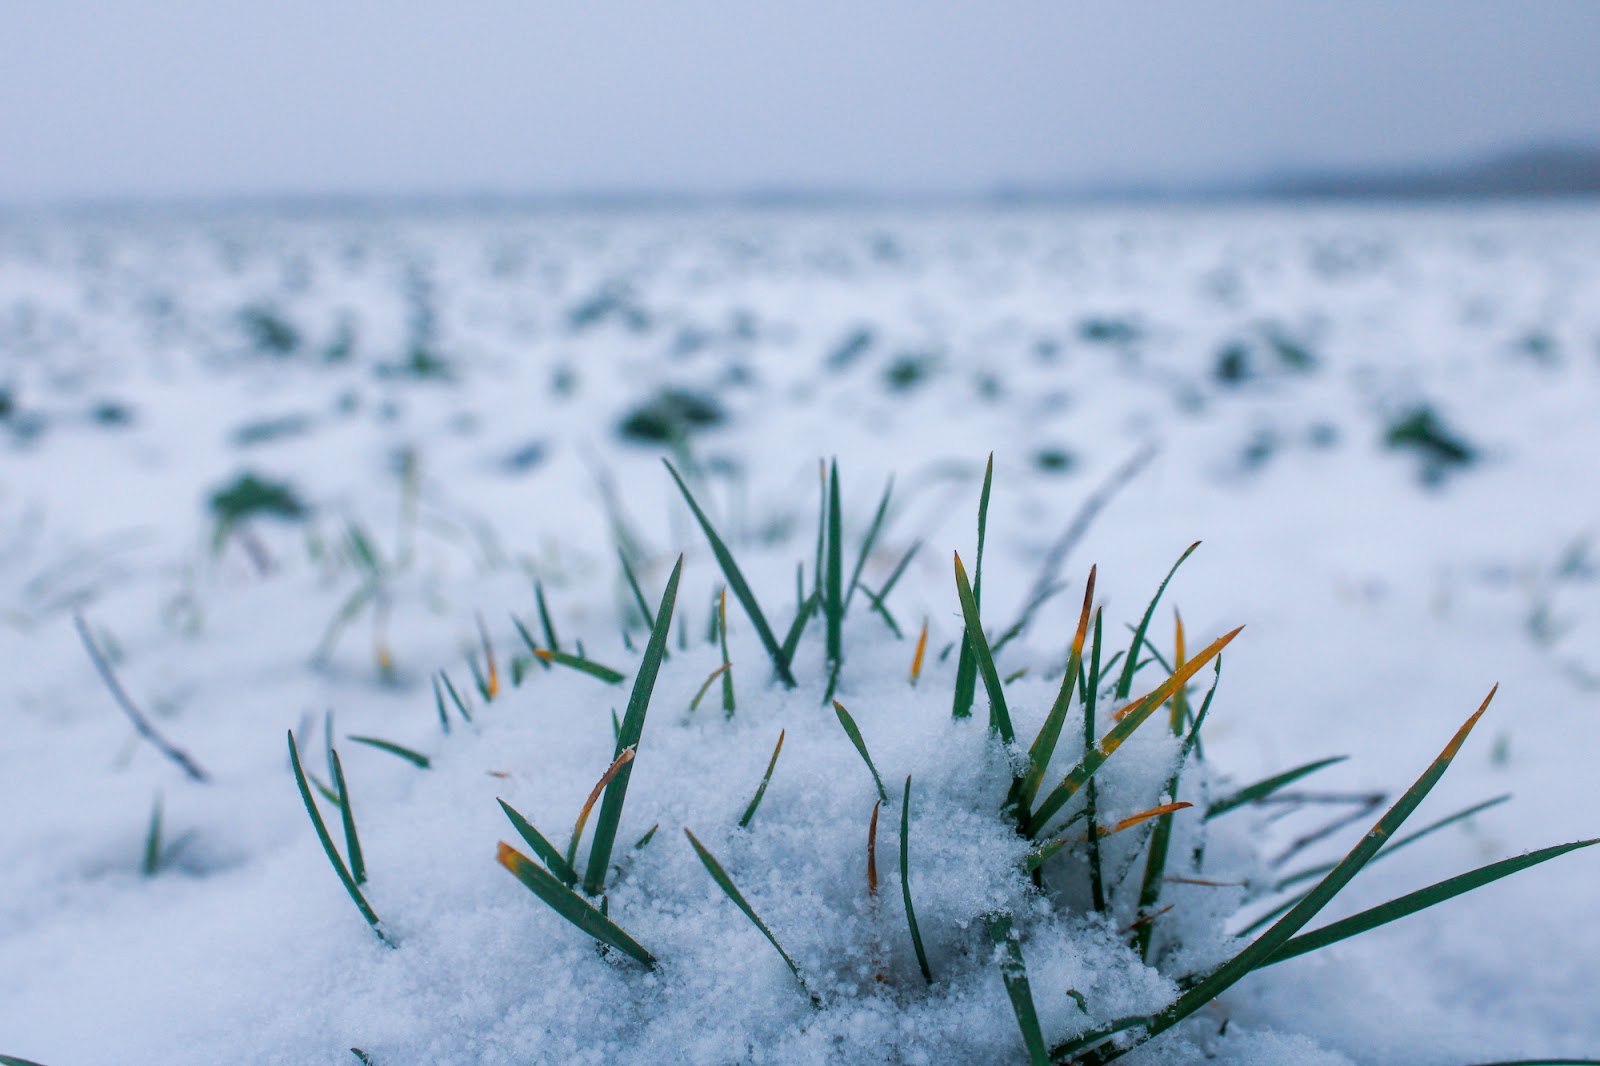 Grass covered in snow.